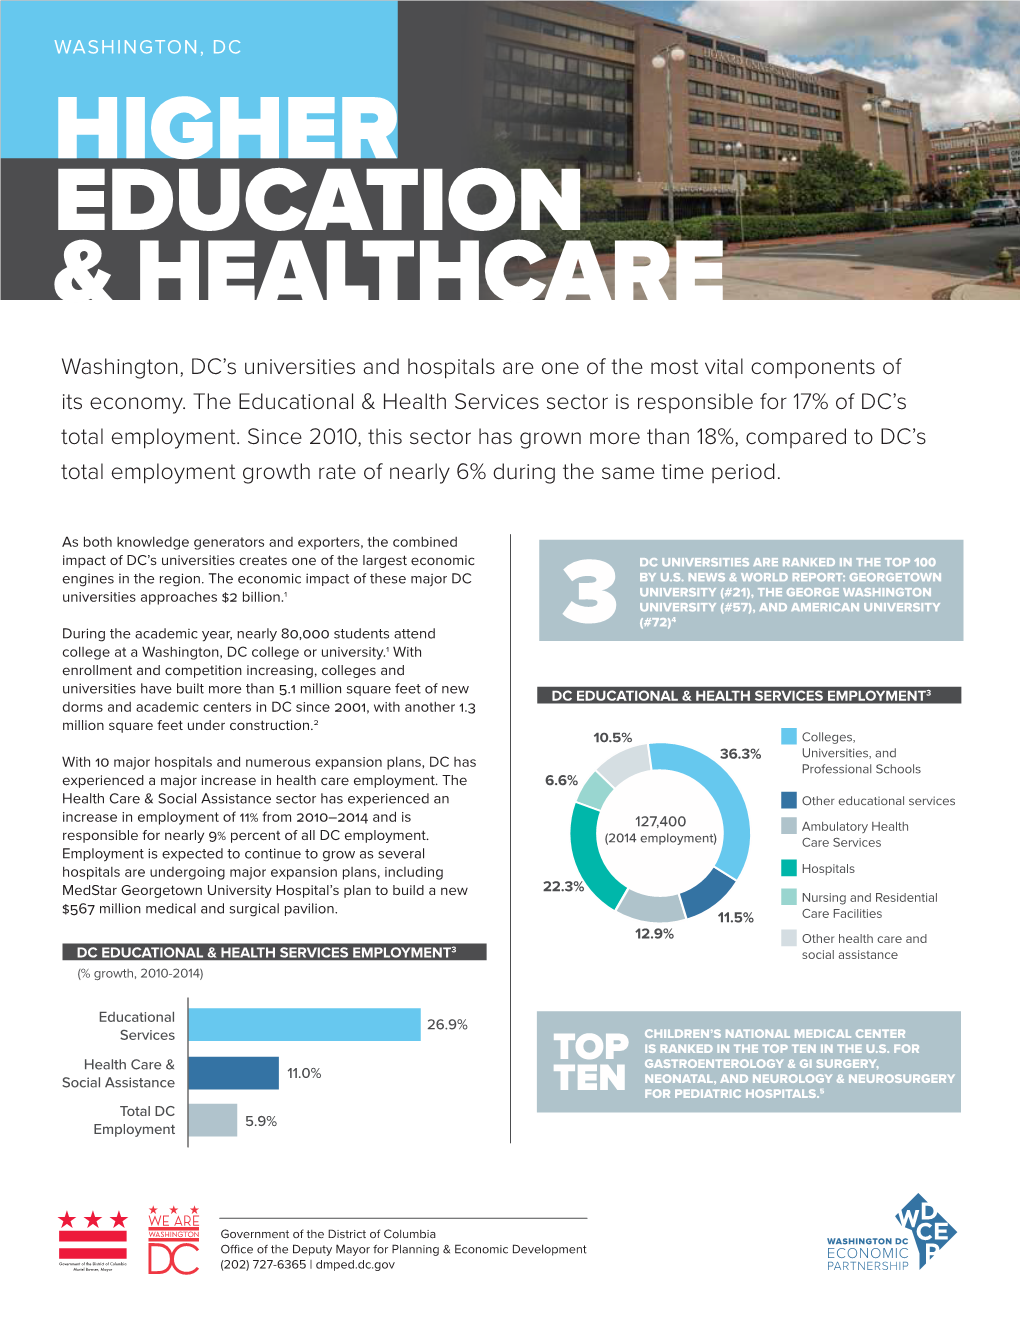 Higher Education & Healthcare